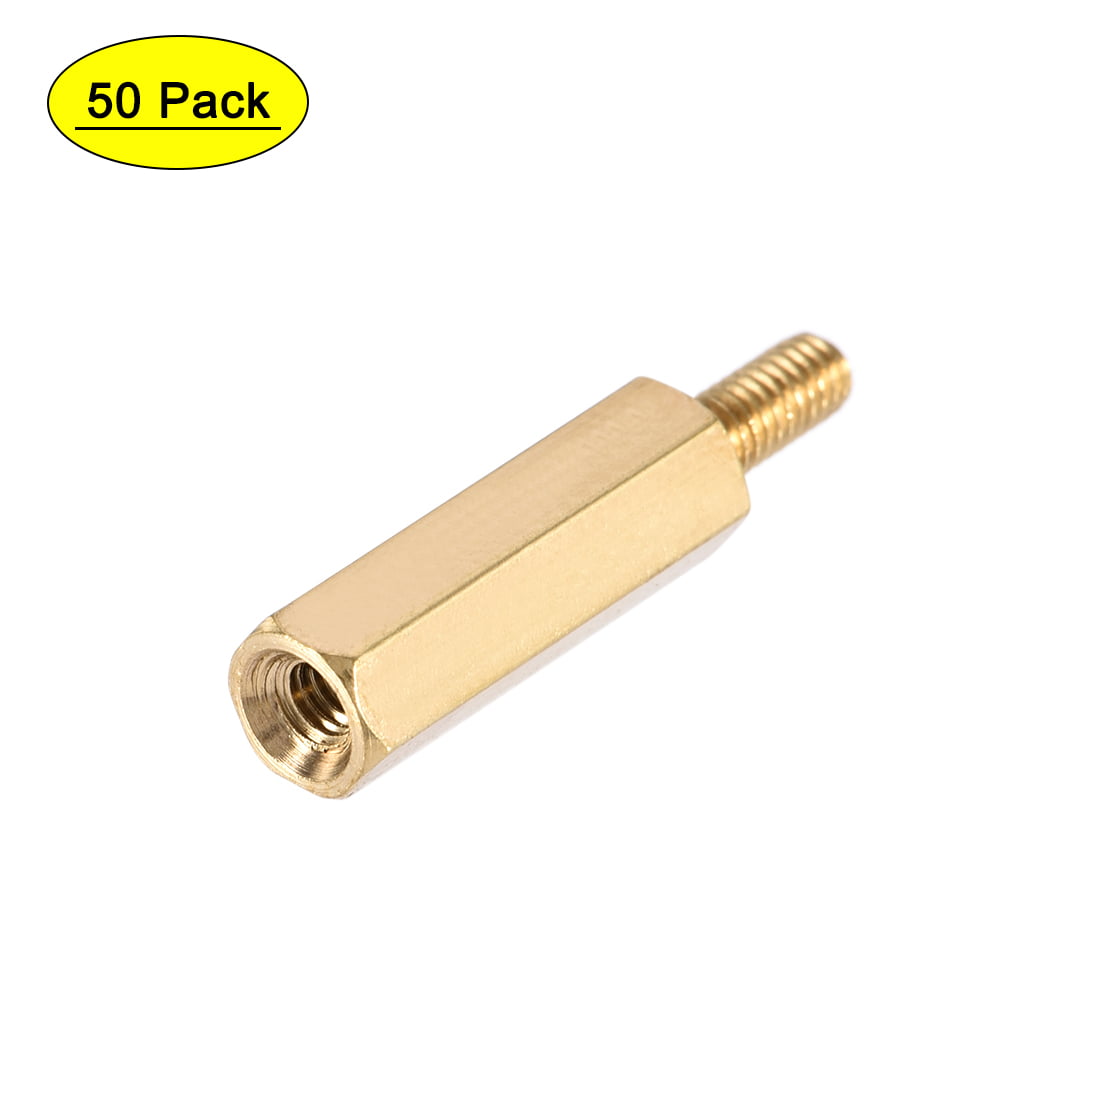 Uxcell Brass M2.5 14mm+6mm Male-Female Hex Standoff 50 Pack